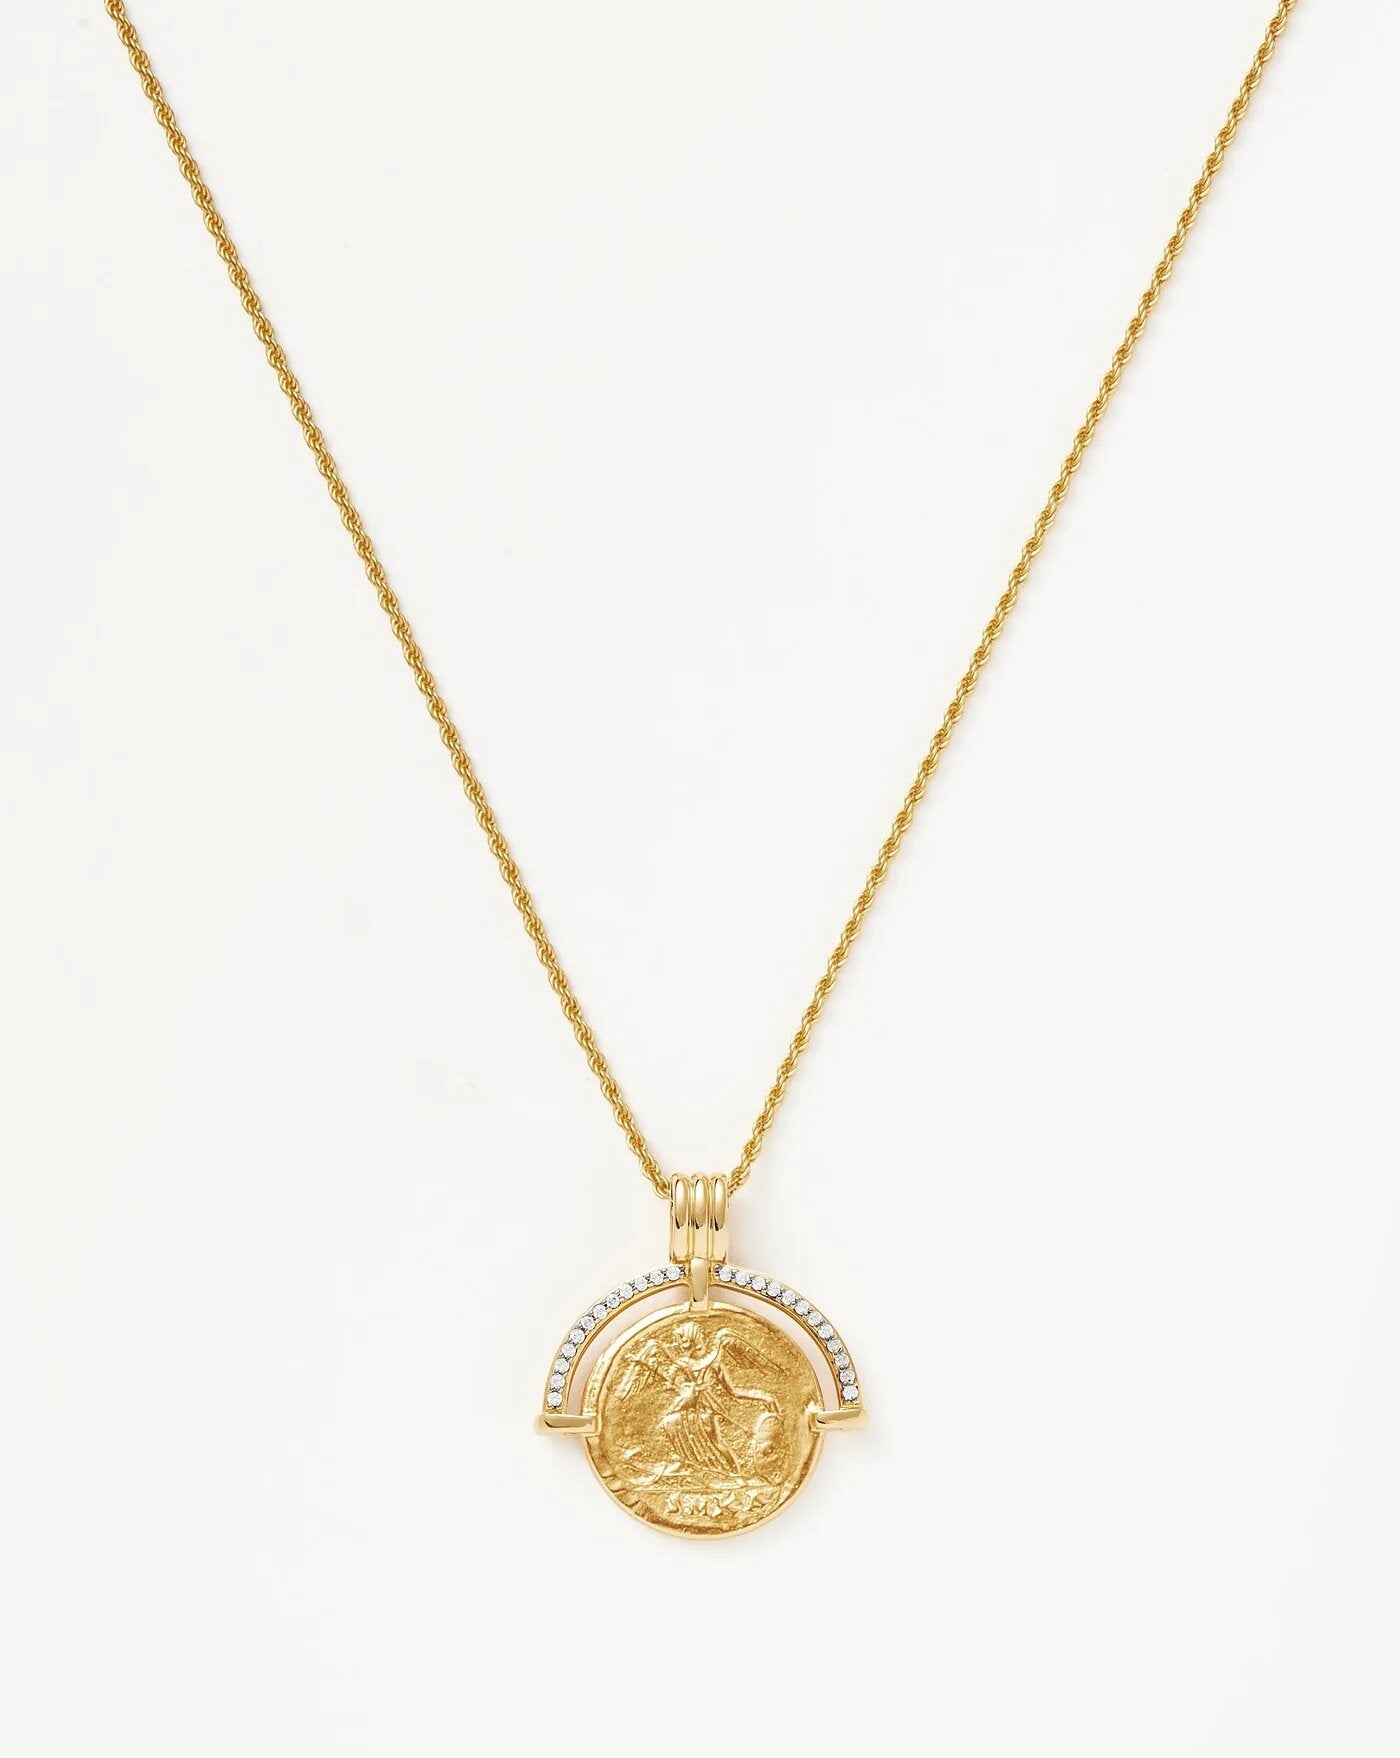 Lucy Williams x Missoma + Engravable Fortuna Arc Coin Pendant Necklace